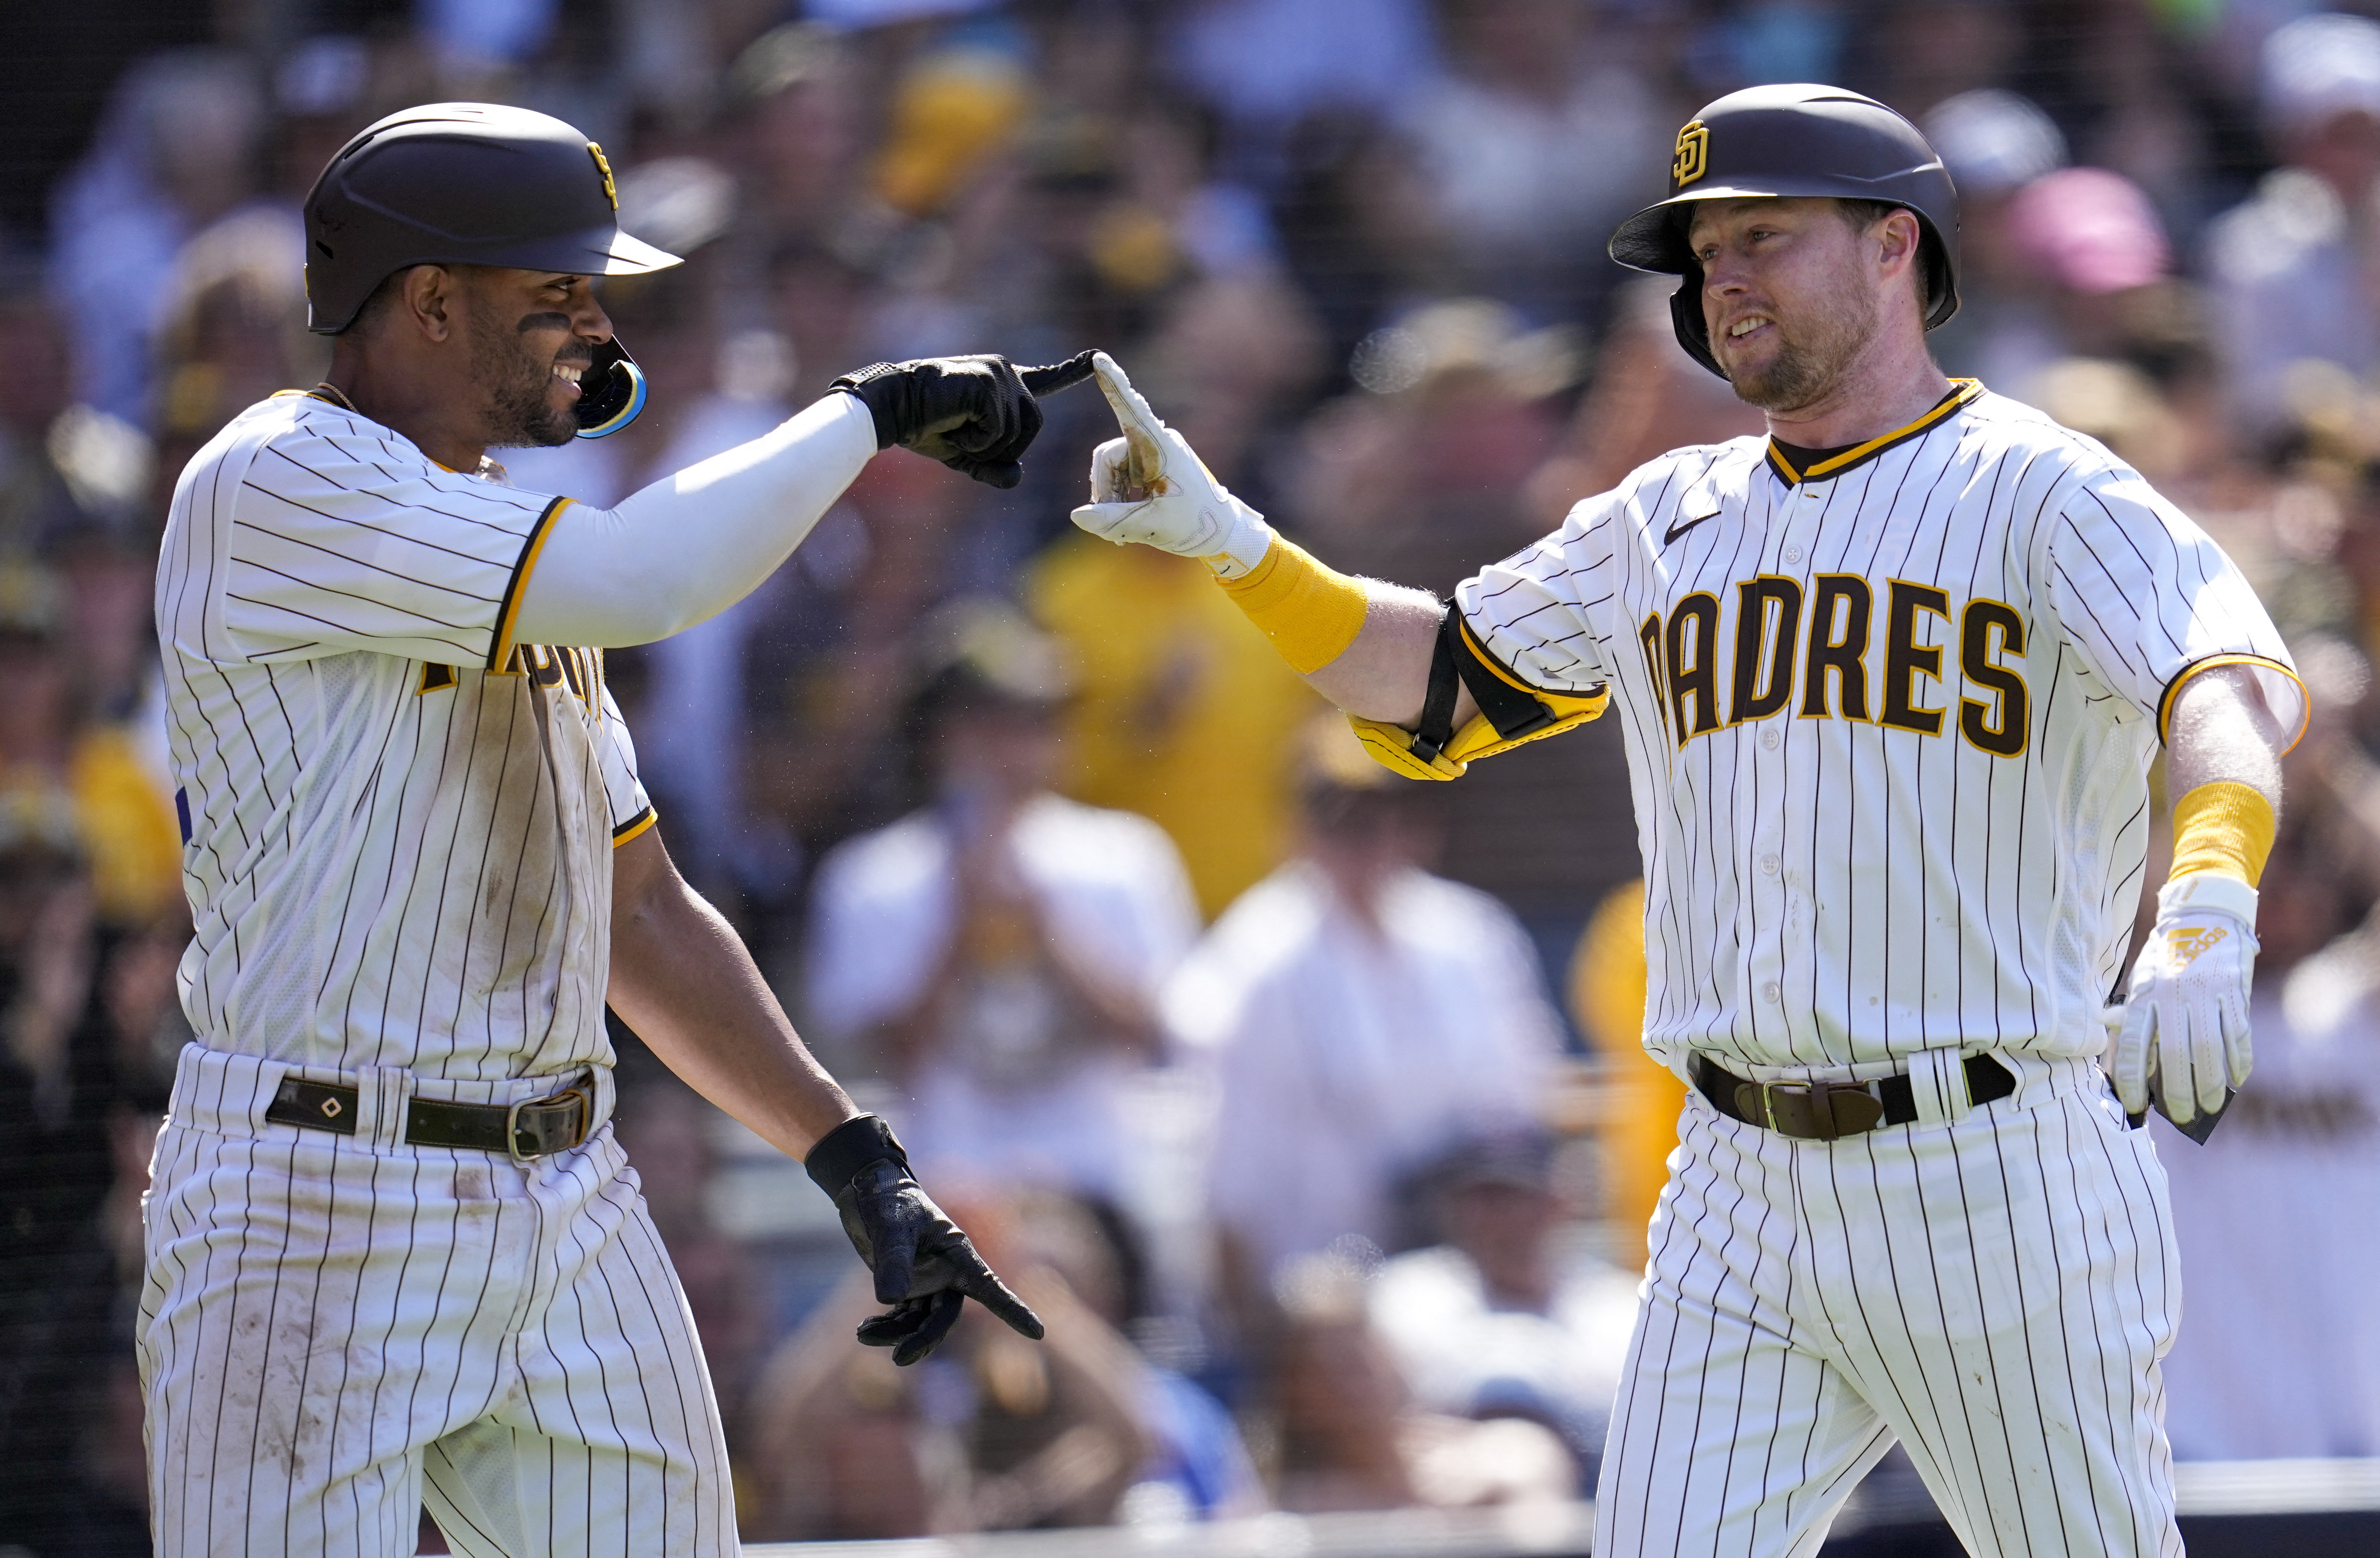 Cronenworth's 2 HRs, 6 RBIs lead Padres past Brewers 10-3 - The